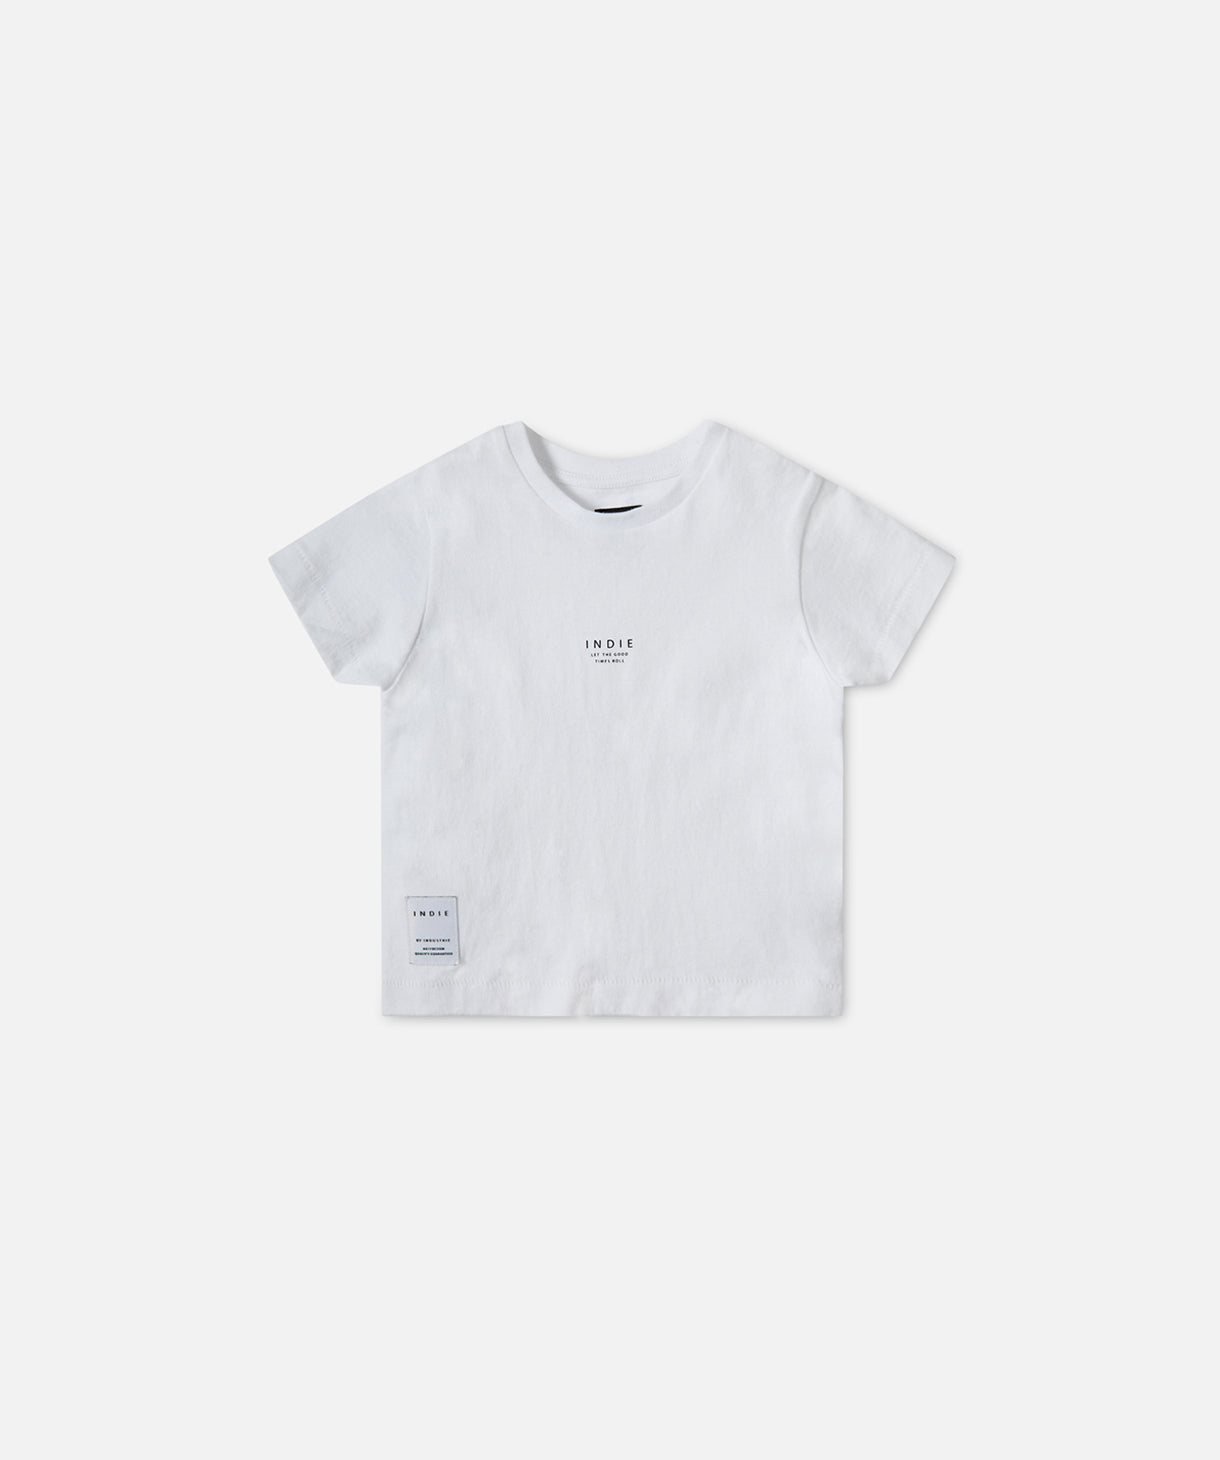 Shop The Marcoola Tee - White | Industrie Kids